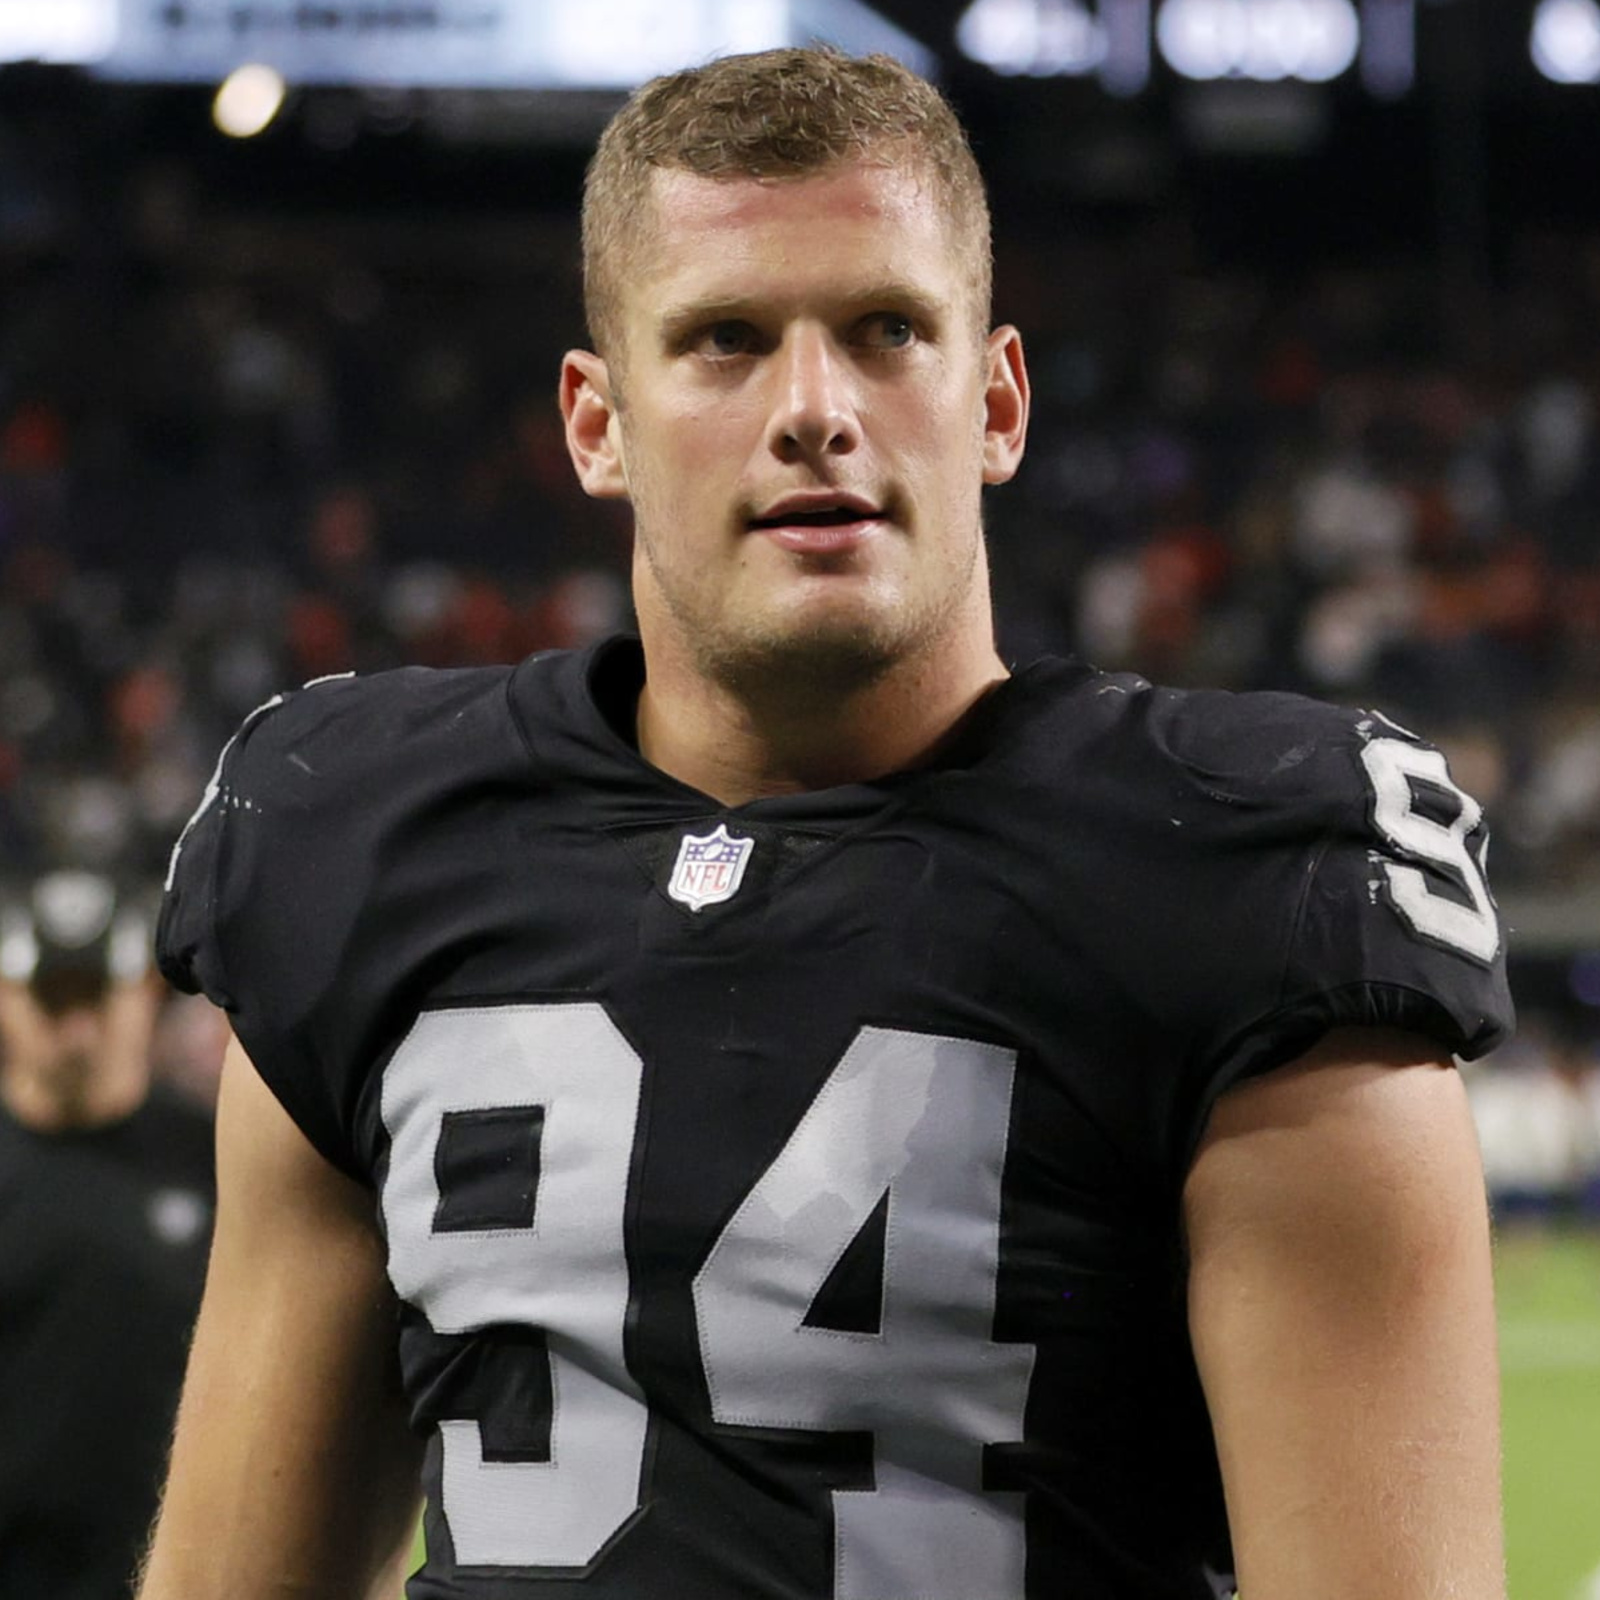 Raiders' Carl Nassib has made a huge impact on the Trevor Project